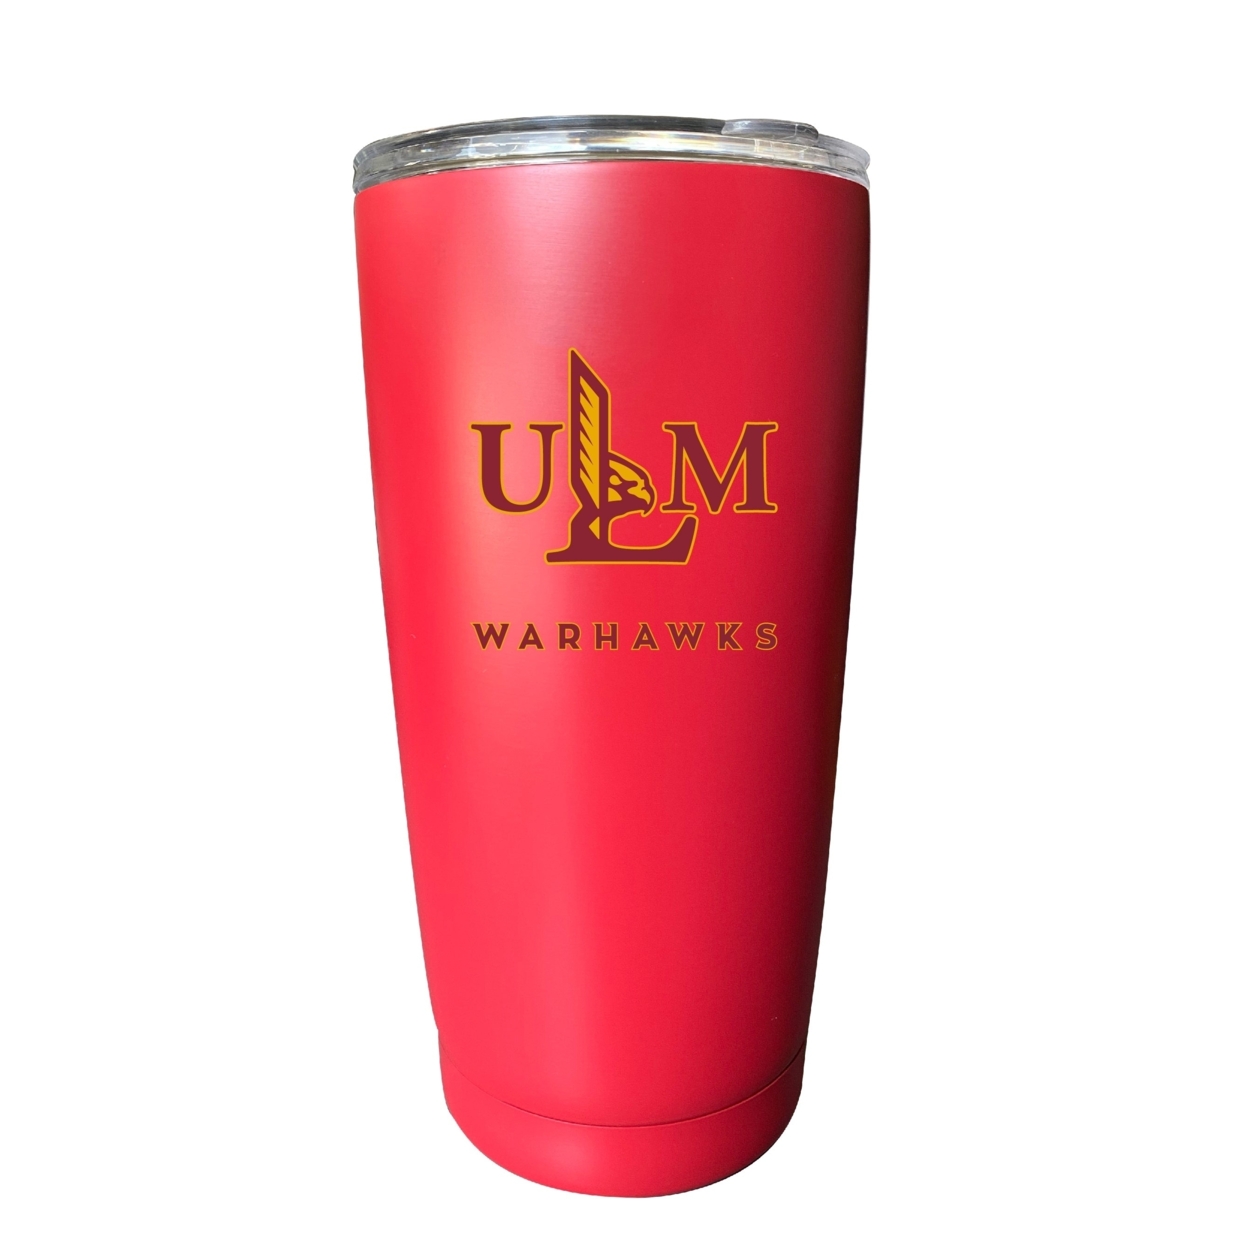 University Of Louisiana Monroe 16 Oz Insulated Stainless Steel Tumbler - Choose Your Color. - Red